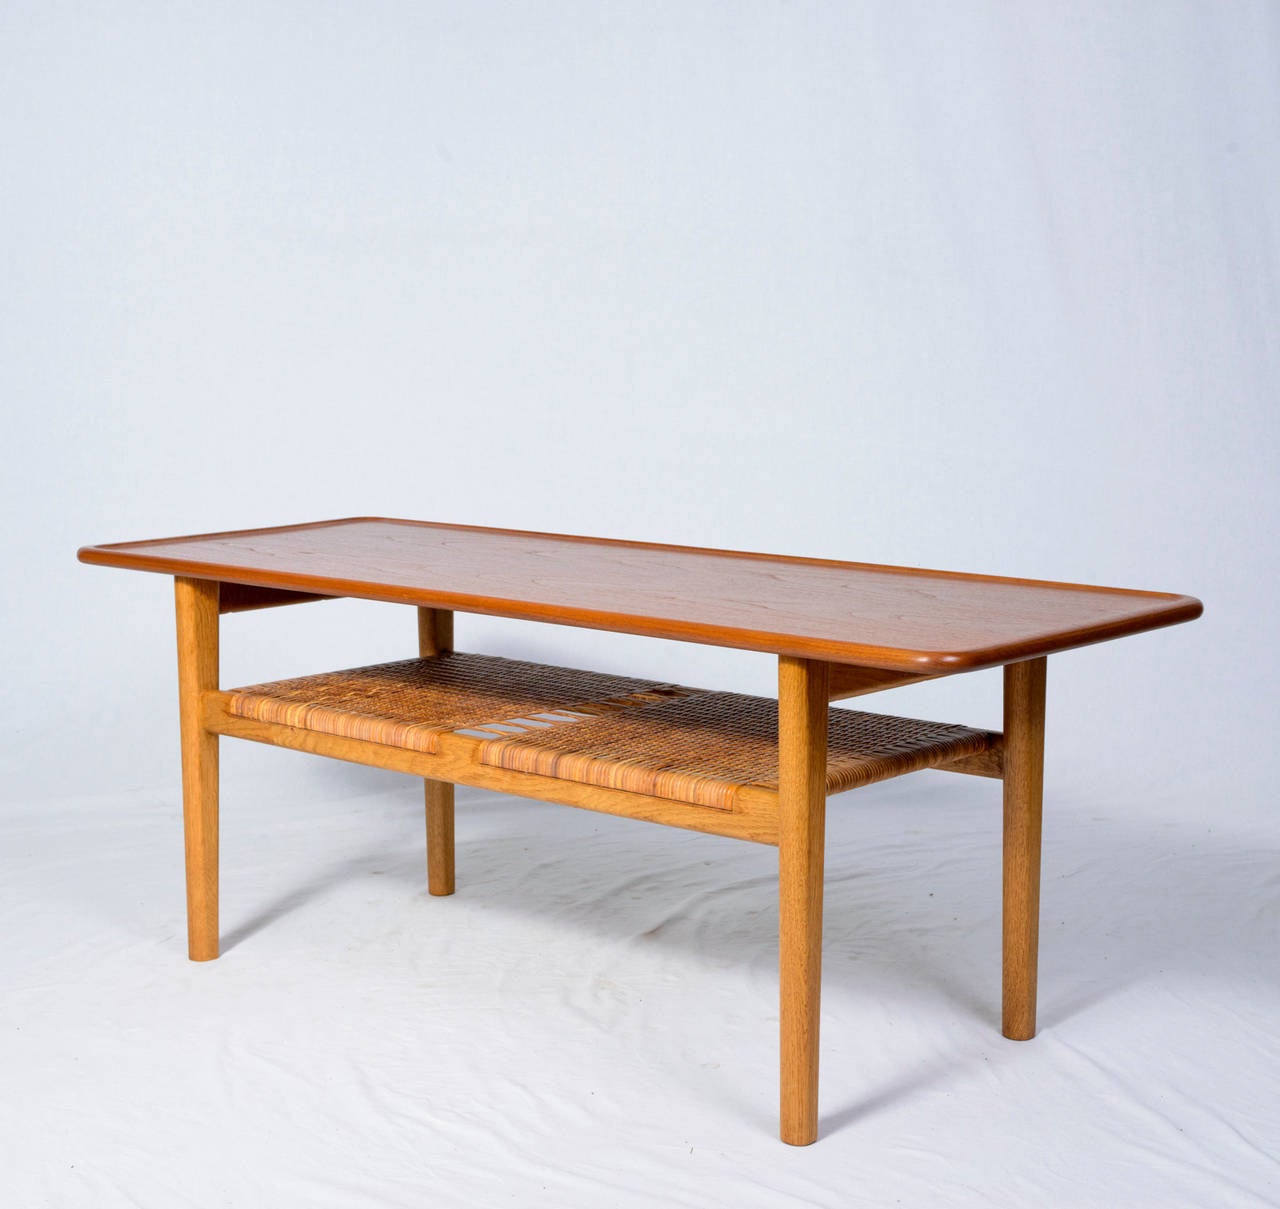 Hans Wegner AT-10 Coffee Table Designed in 1955 and Produced by Andreas Tuck